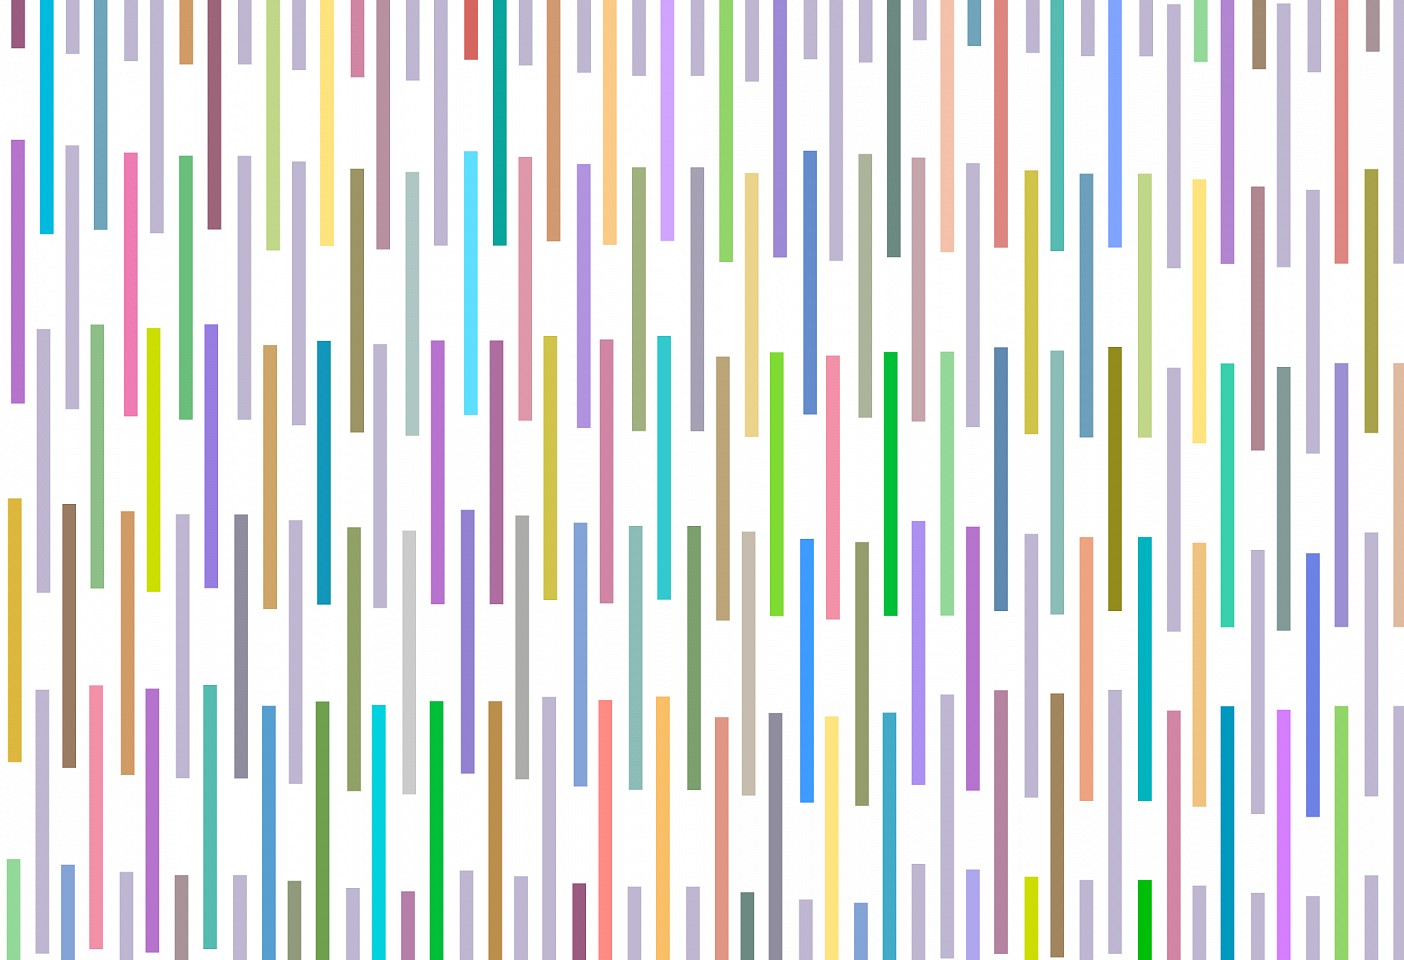 Dane Albert, Color Sticks #41, 2023
Acrylic on canvas (Concept), 48 x 72 in. (121.9 x 182.9 cm)
Series of colored lines and shapes in multiple configurations
DA.2023.sticks-041